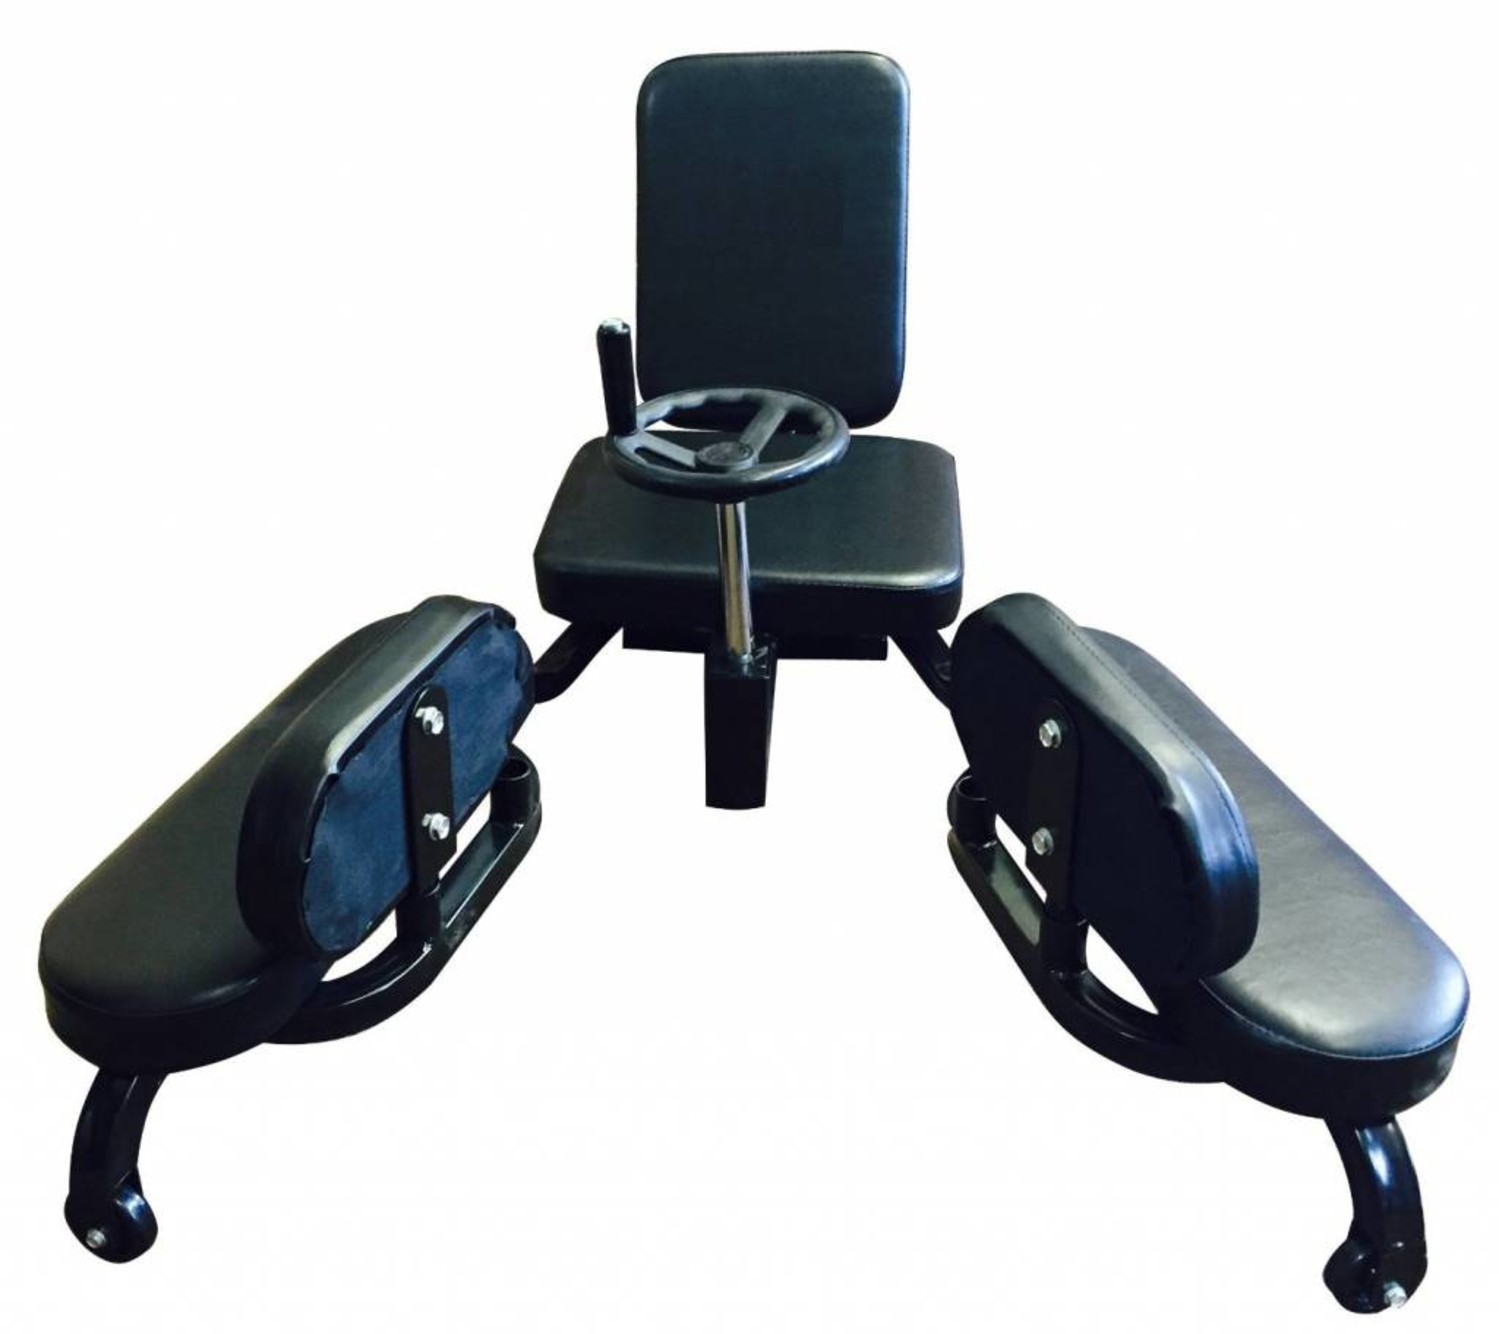 Leg Stretching Machine is the ultimate to improve splits - Enso Martial  Arts Shop Bristol